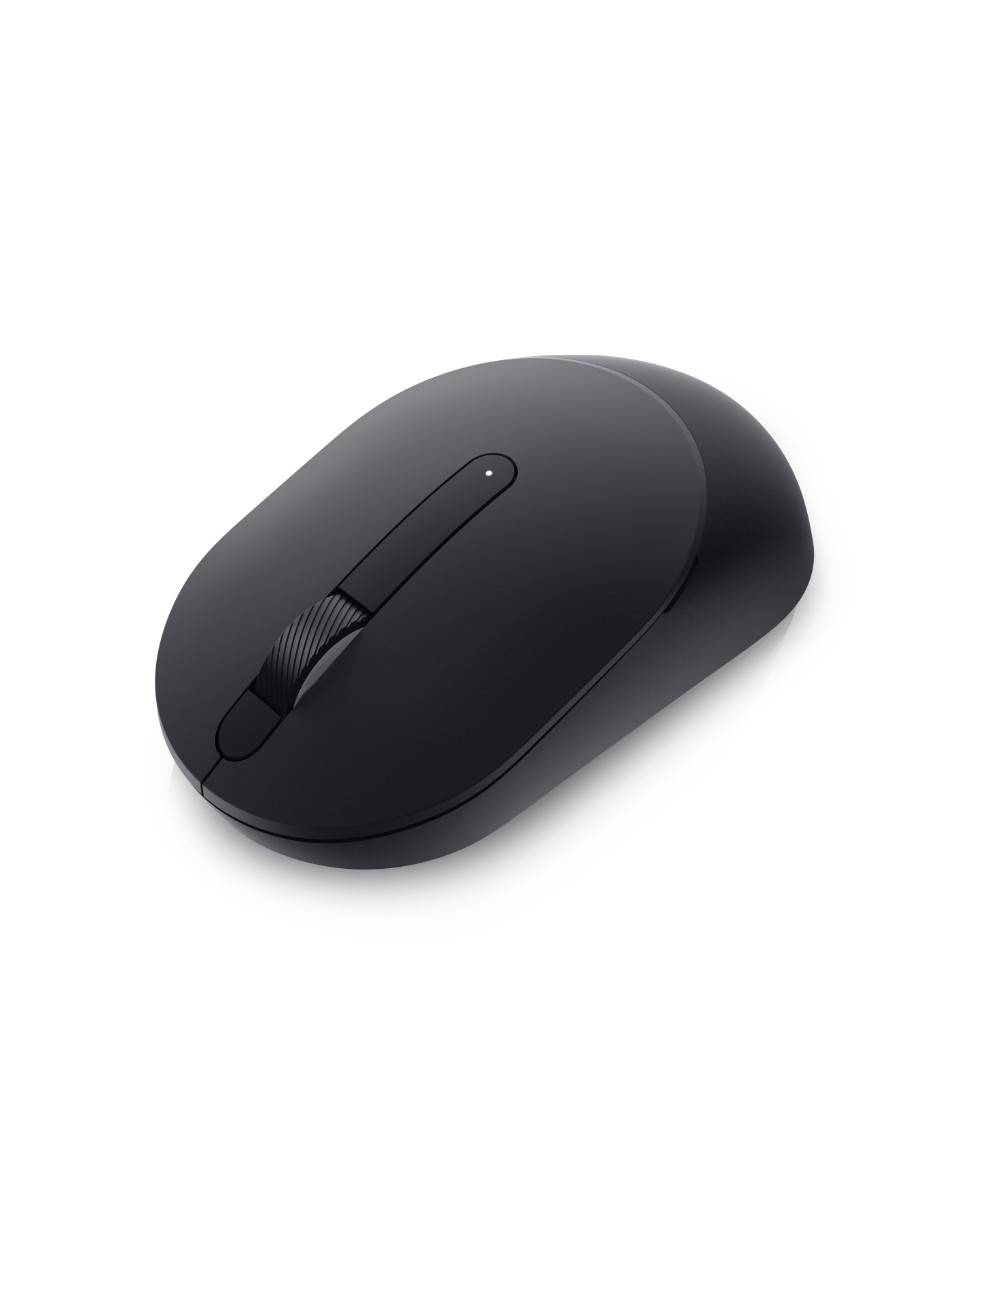 Dell MS300 Full-Size Wireless Mouse, Black